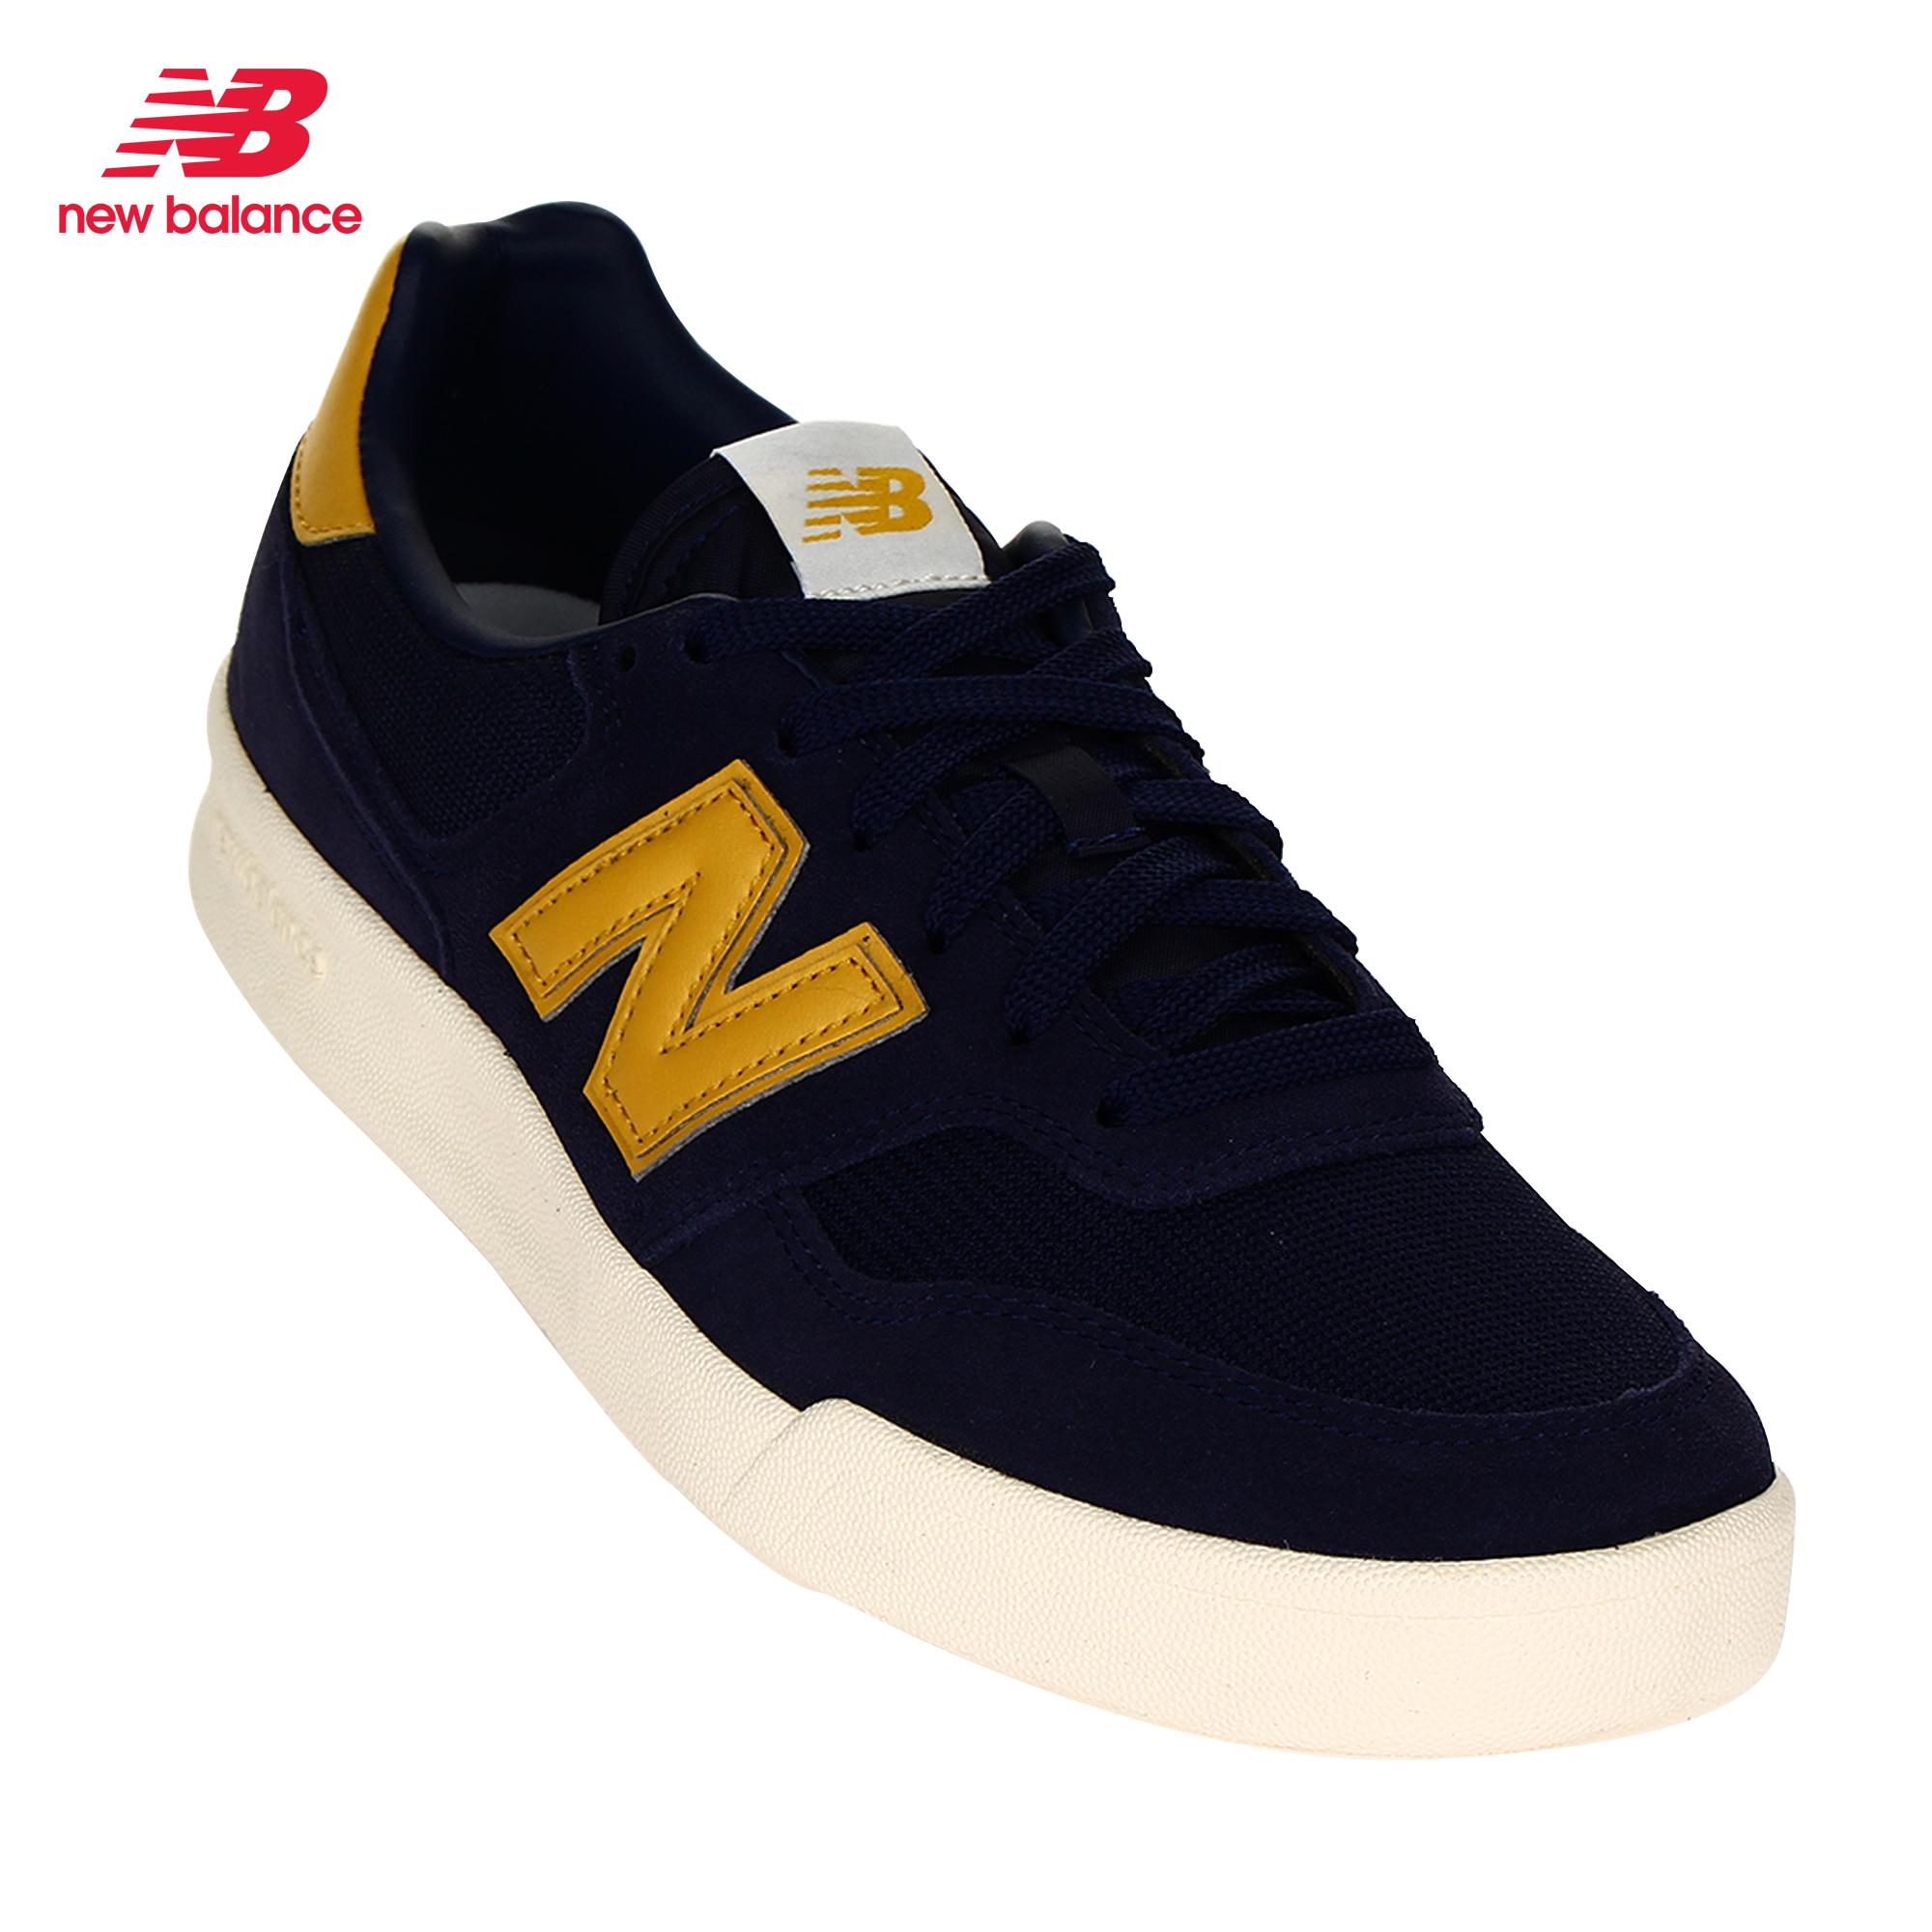 new balance 300 court classic sneakers womens